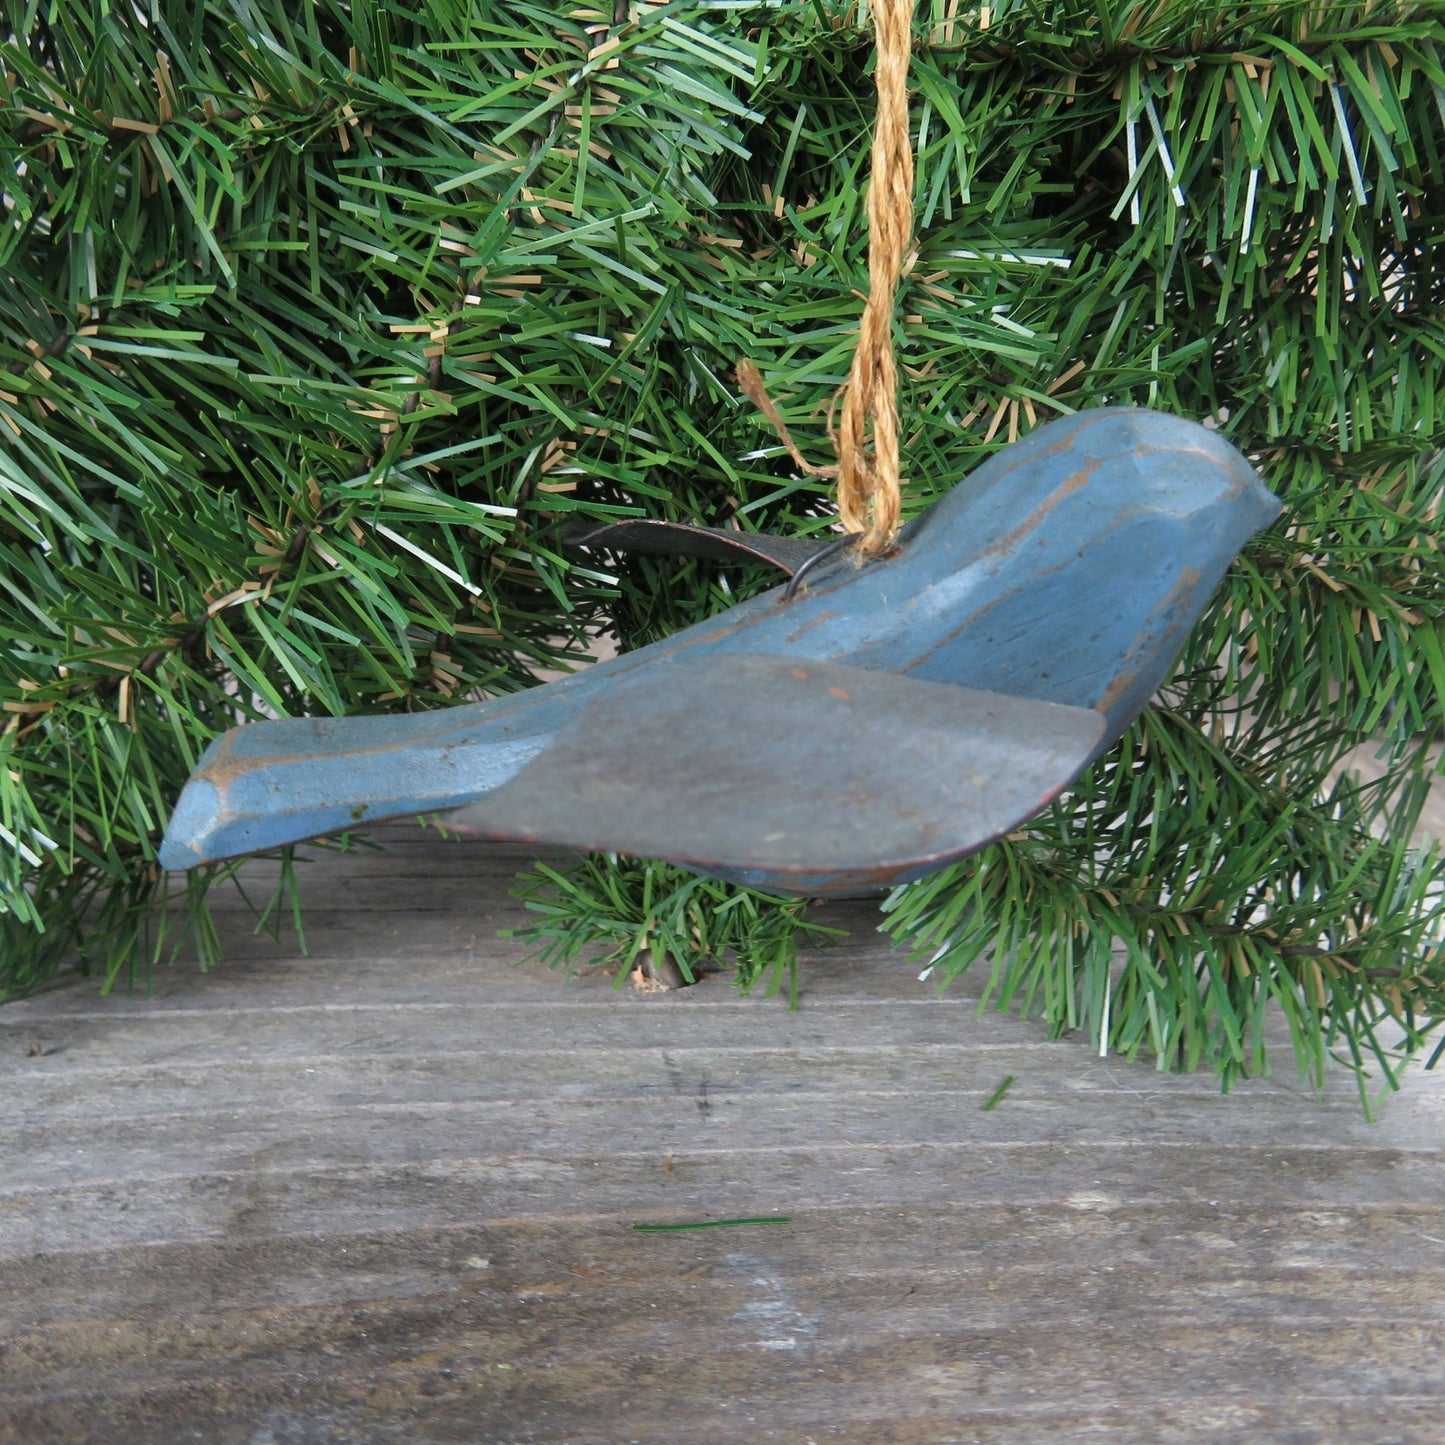 Blue Wooden Bird Ornament Primitive Rustic Style Metal Wings Flying Christmas